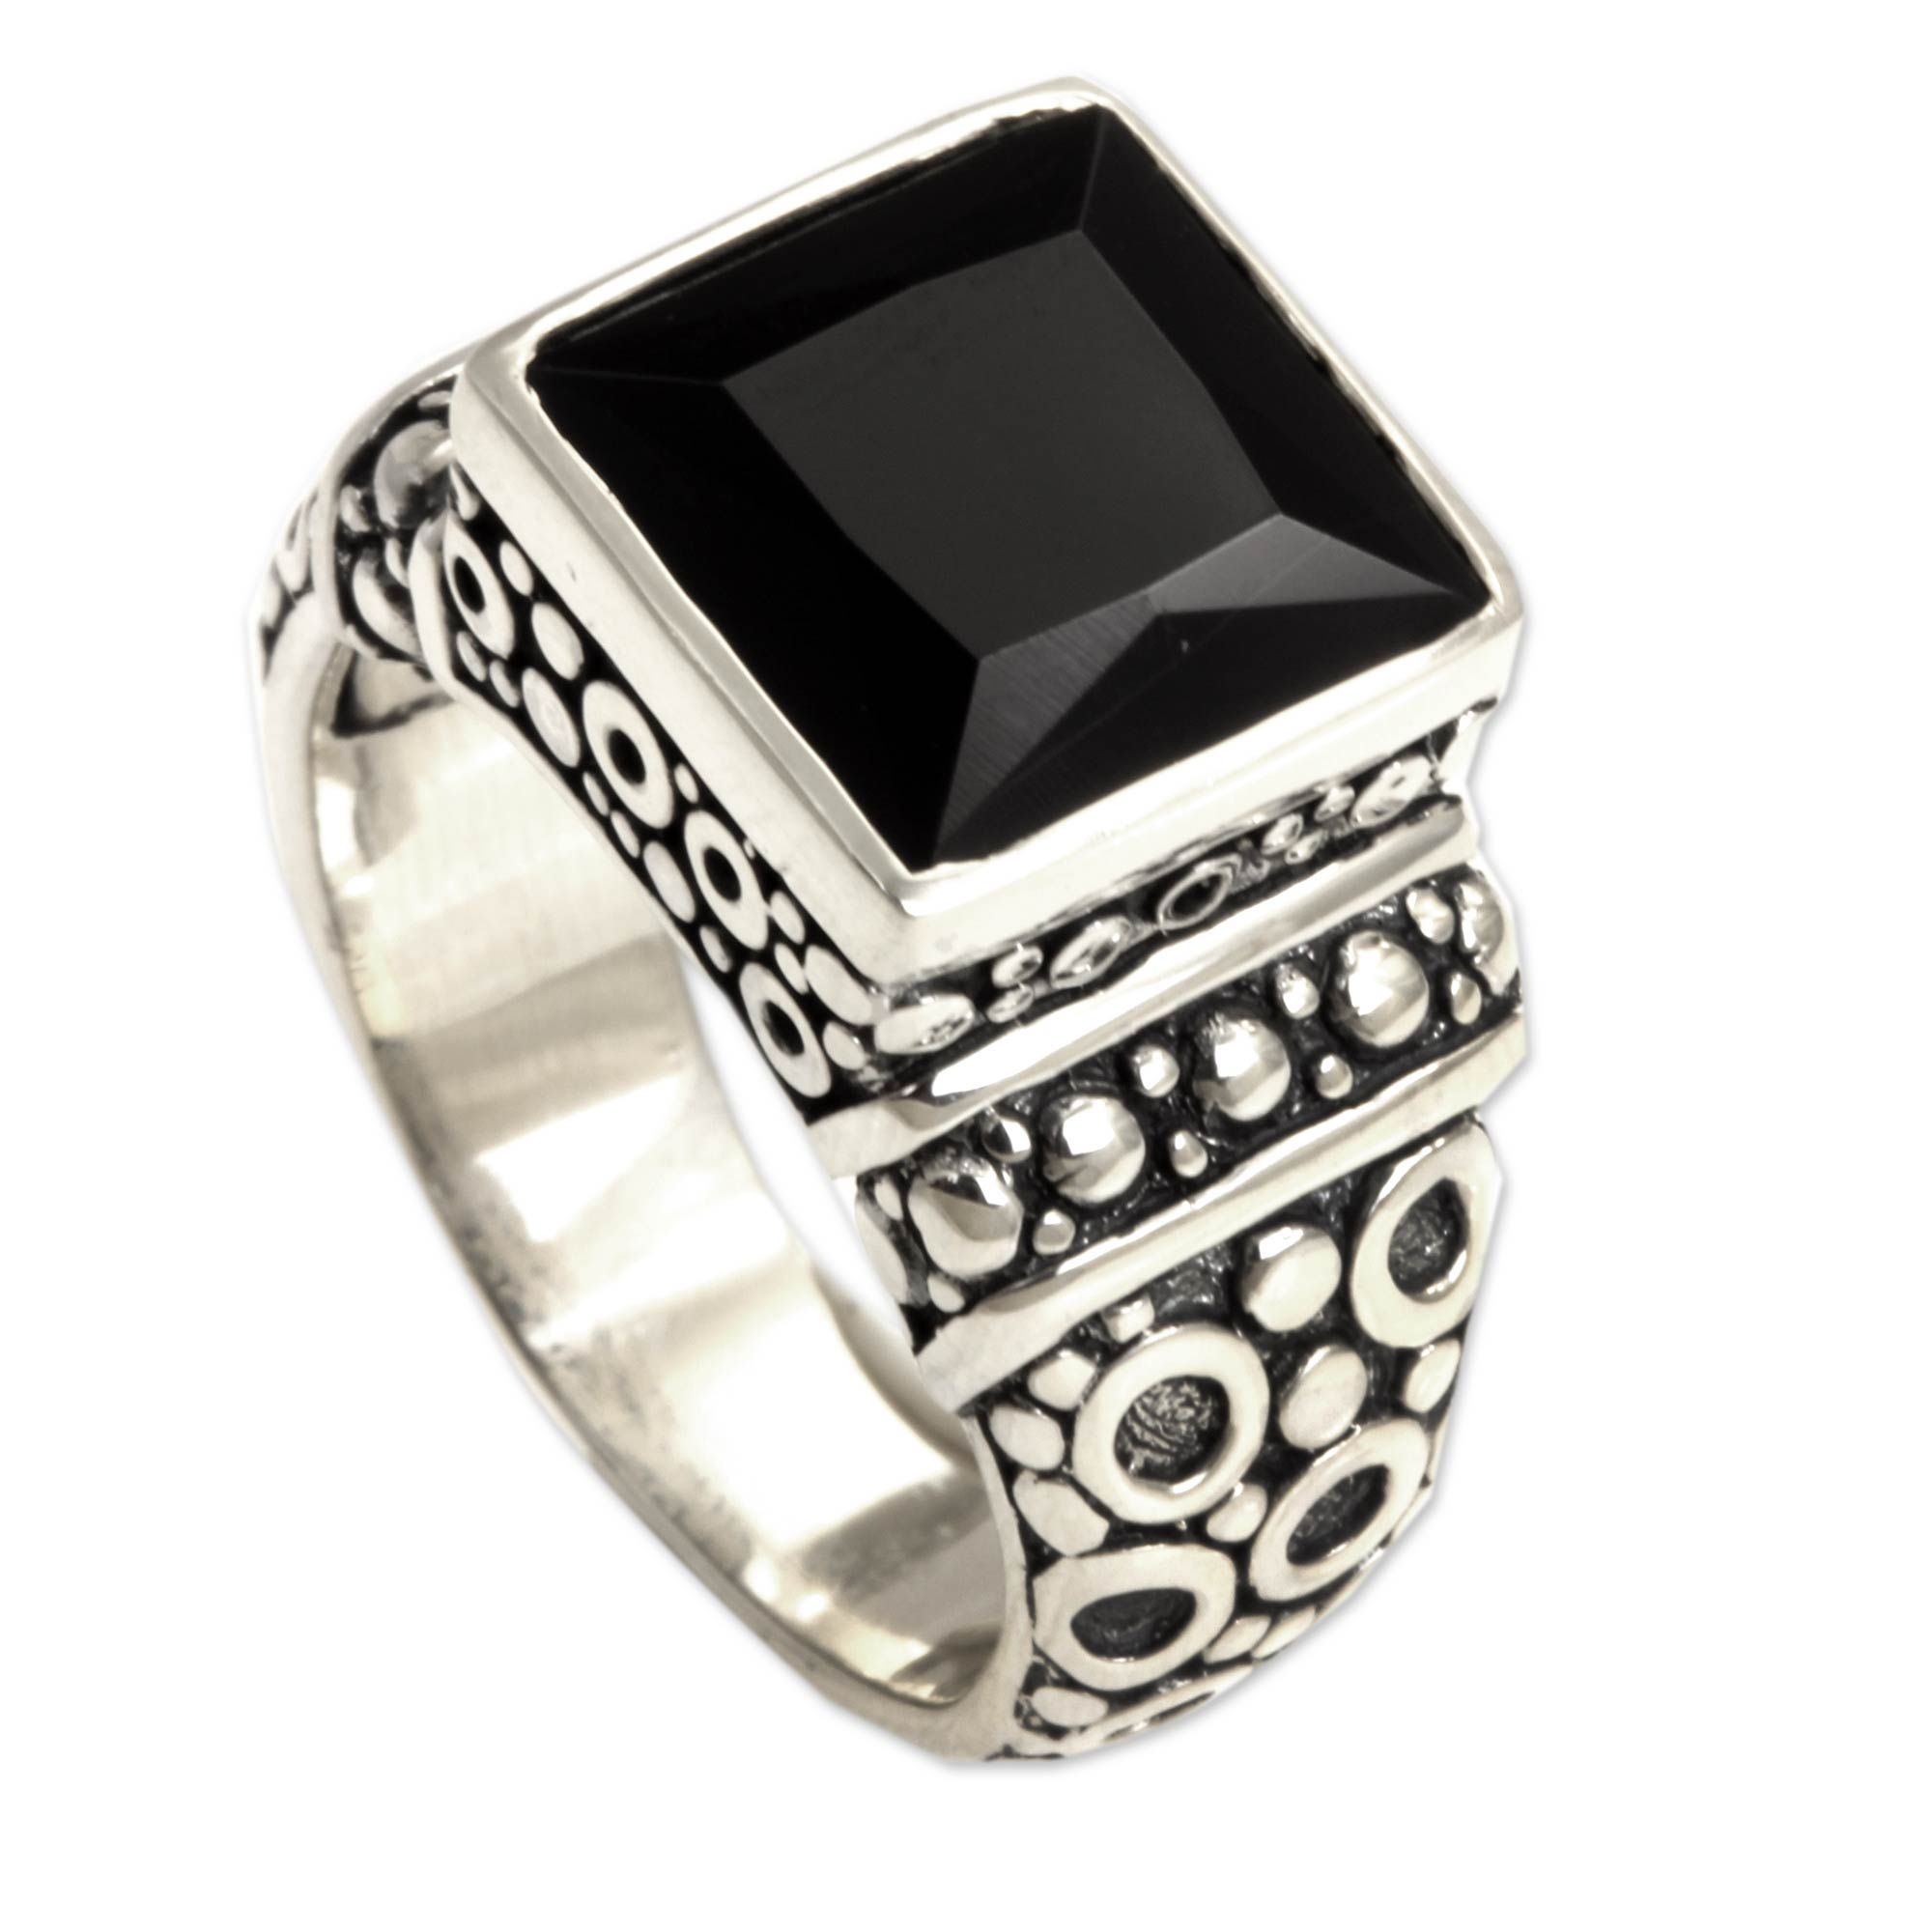 Kiva Store Men S Sterling Silver And Onyx Ring Midnight Shadow